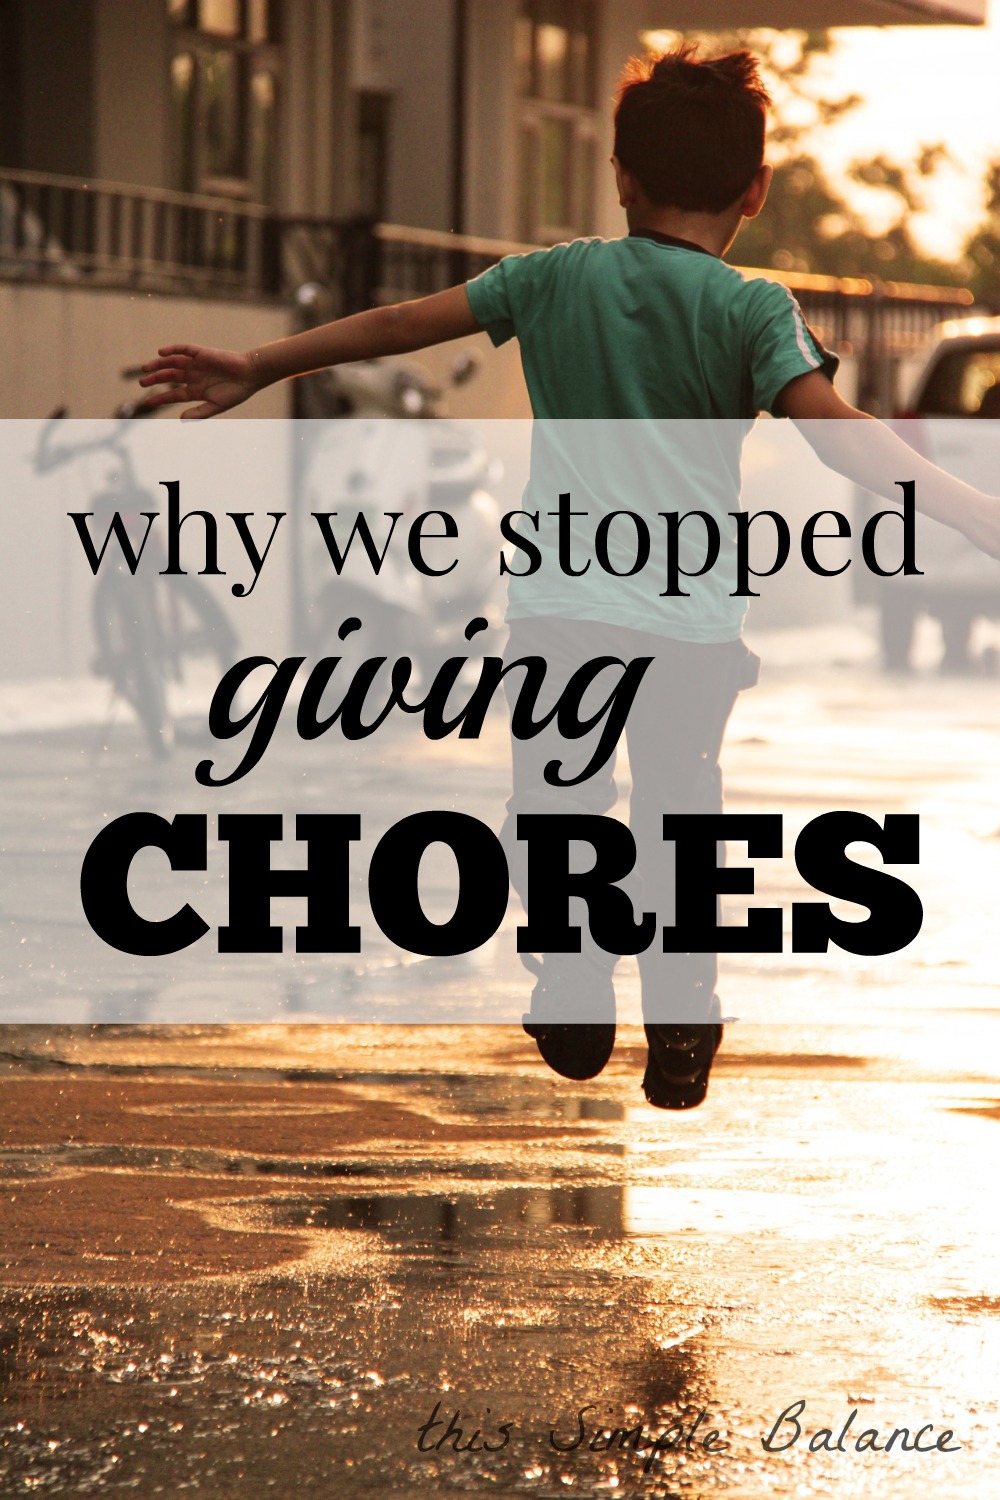 young boy without chores running through the streets, with text overlay, "why we stopped giving chores"